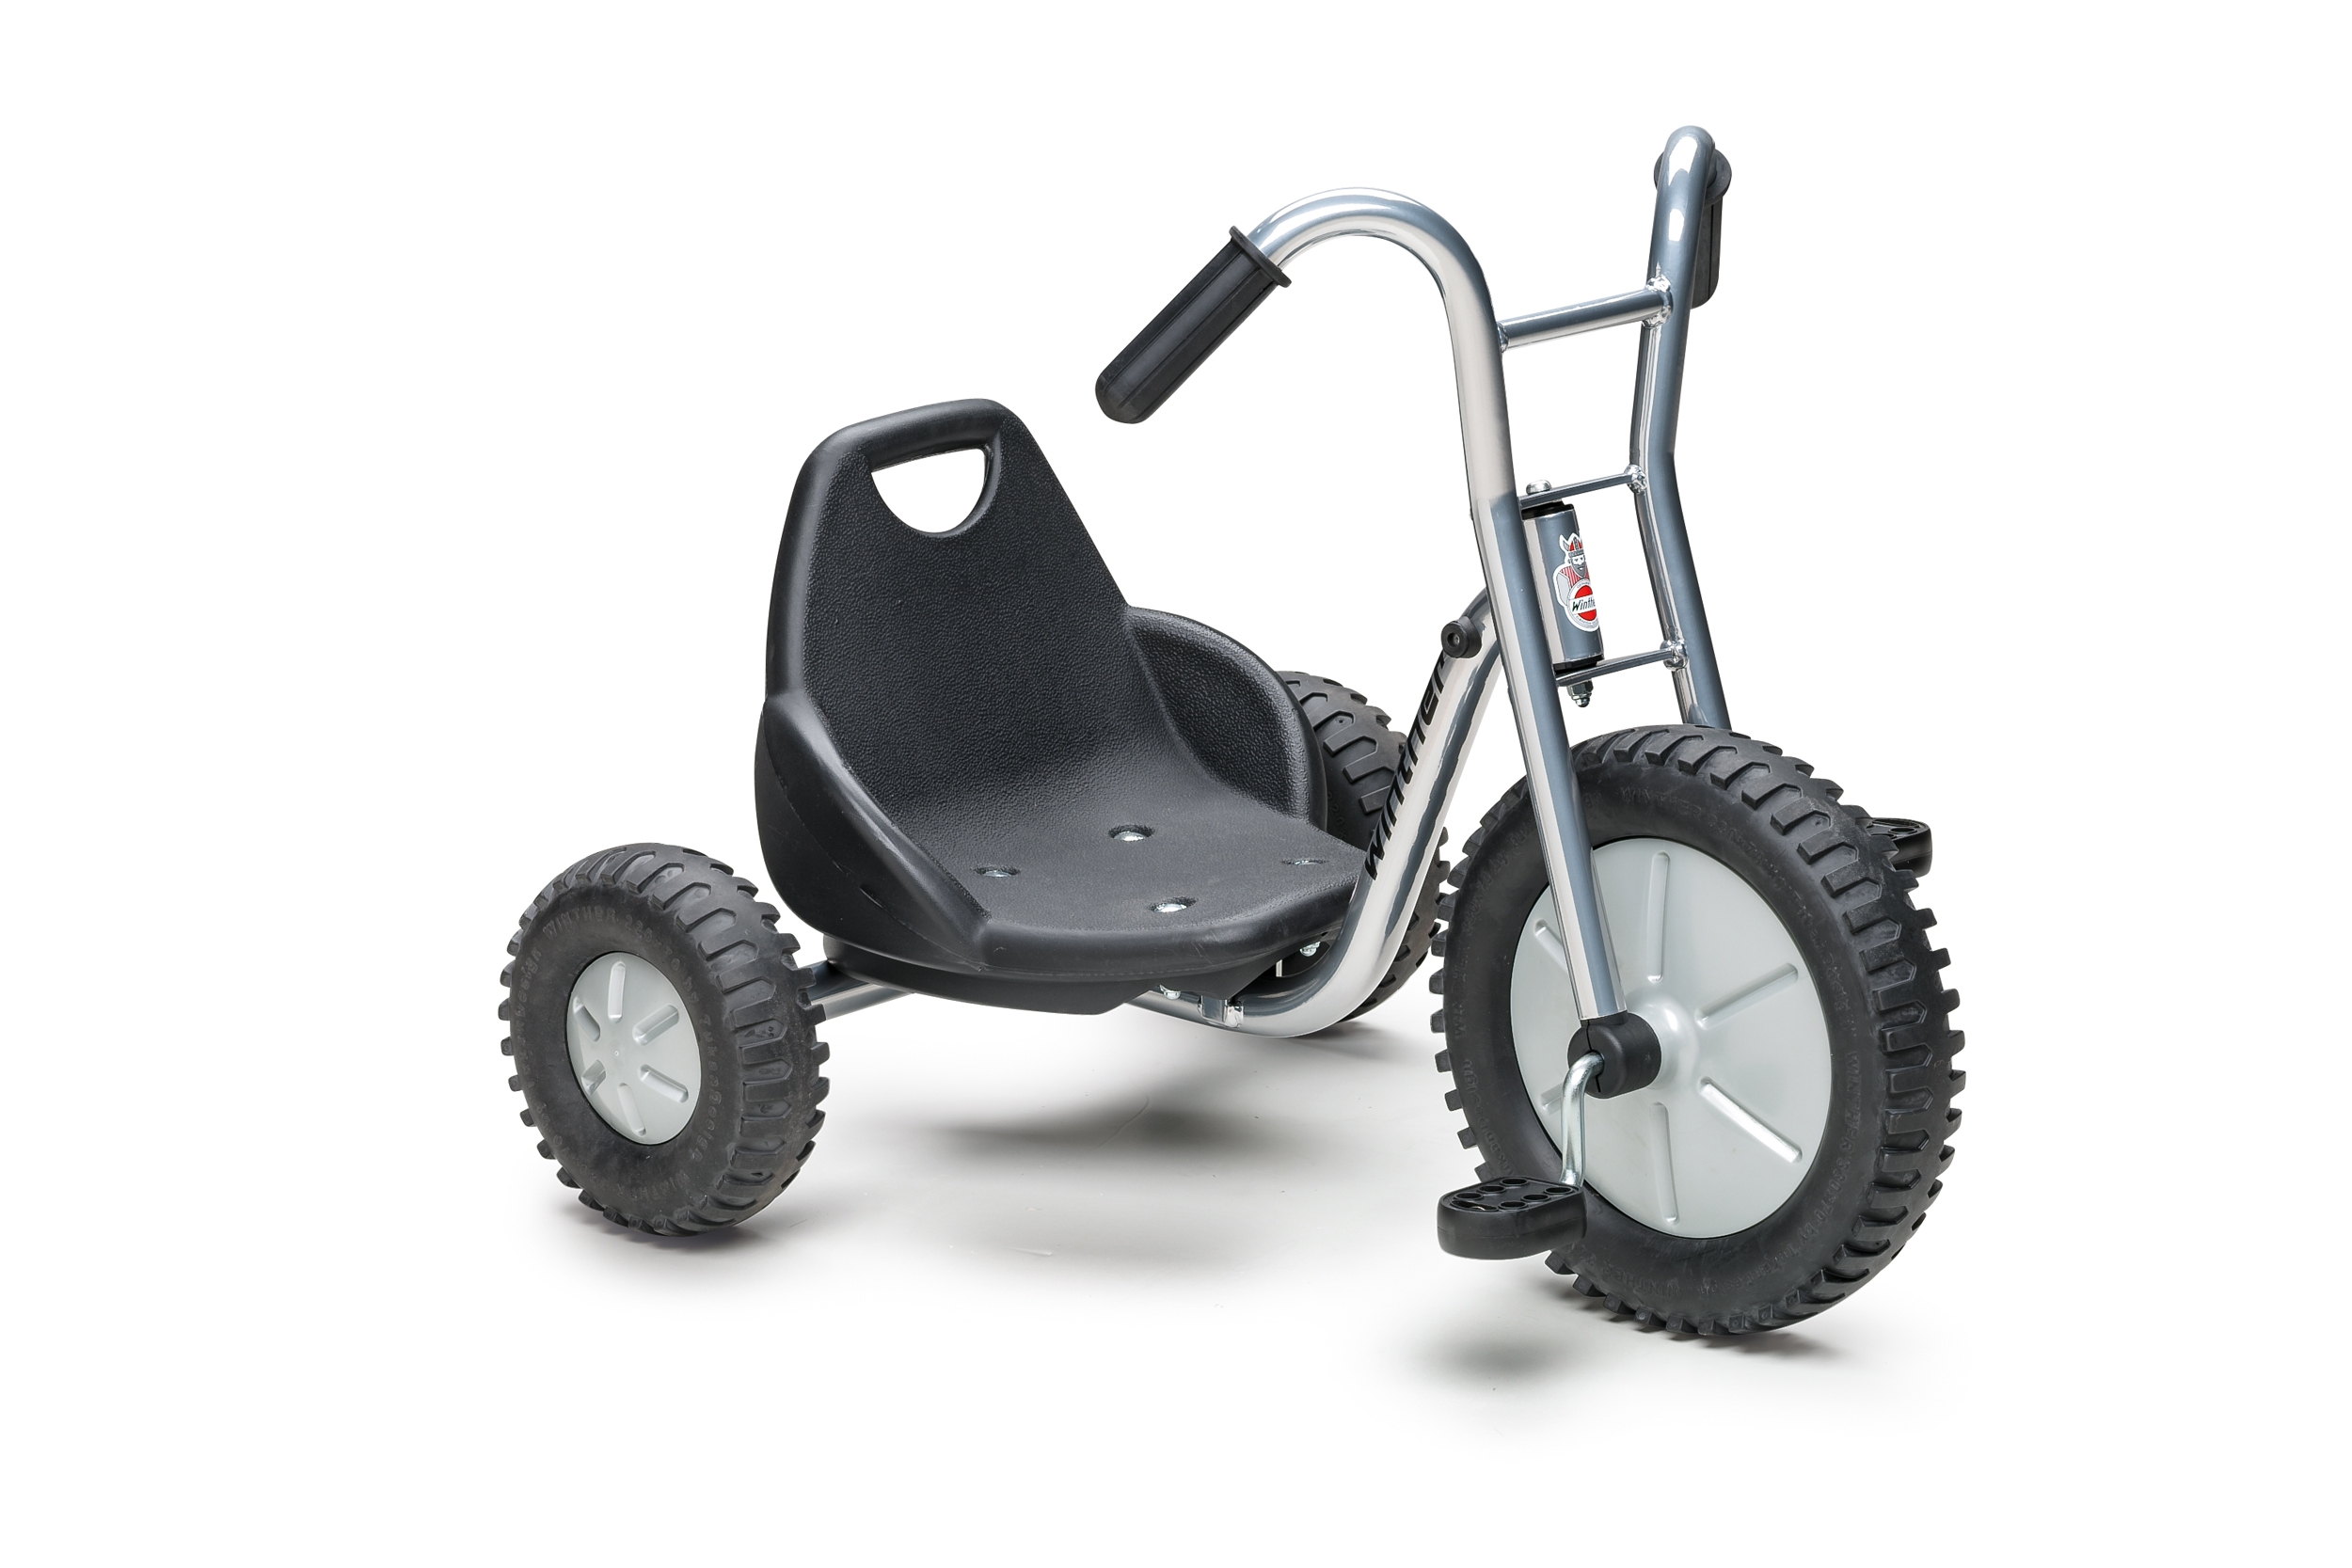 Winther Viking Explorer "OFF-ROAD Easy Rider"